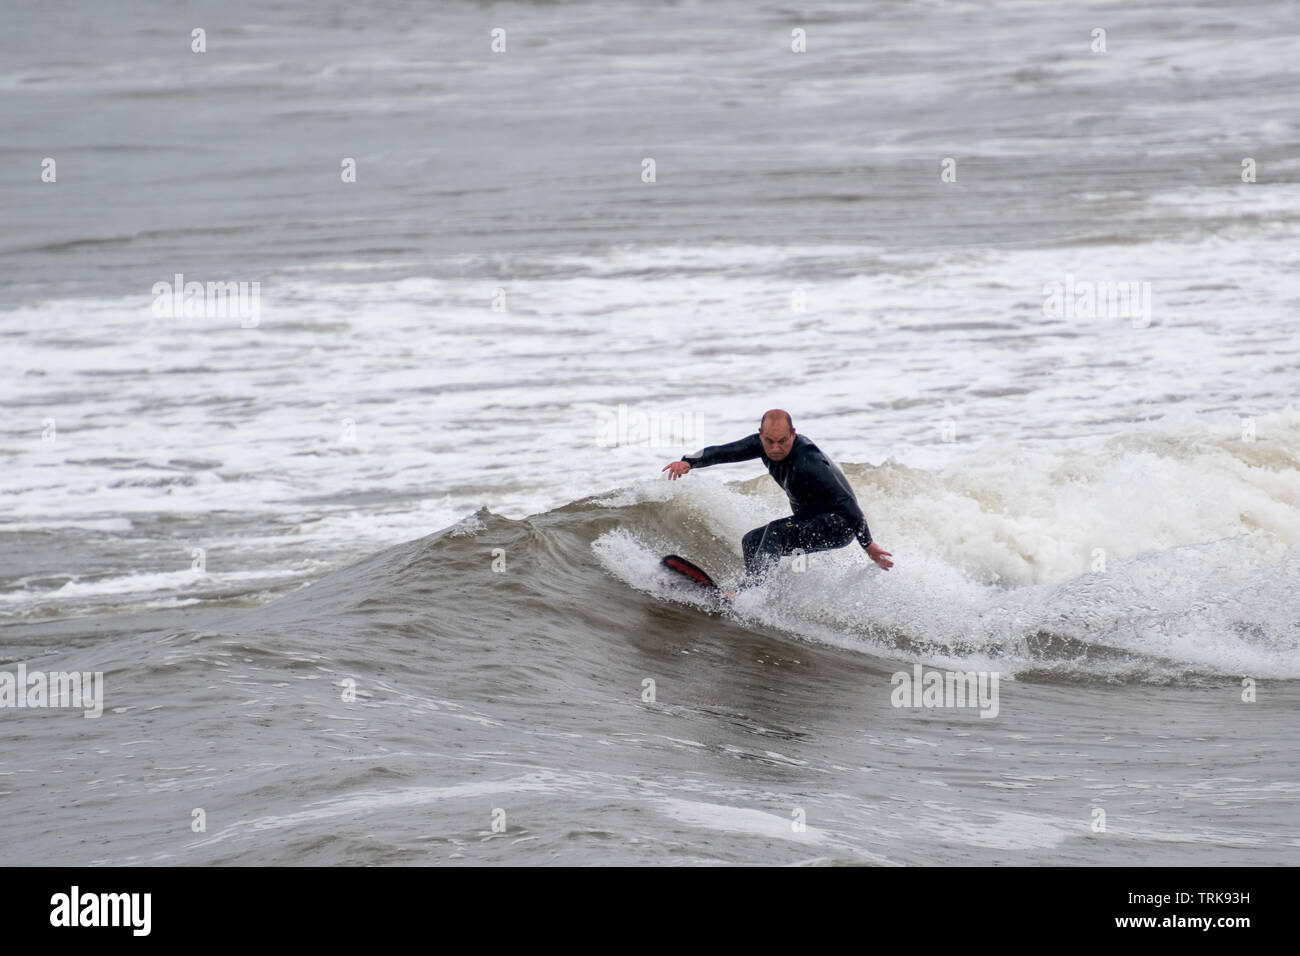 Even a bit of rain doesn't stop a middle-aged surfer from enjoying himself. Test Bay Porthcawl, UK. Stock Photo